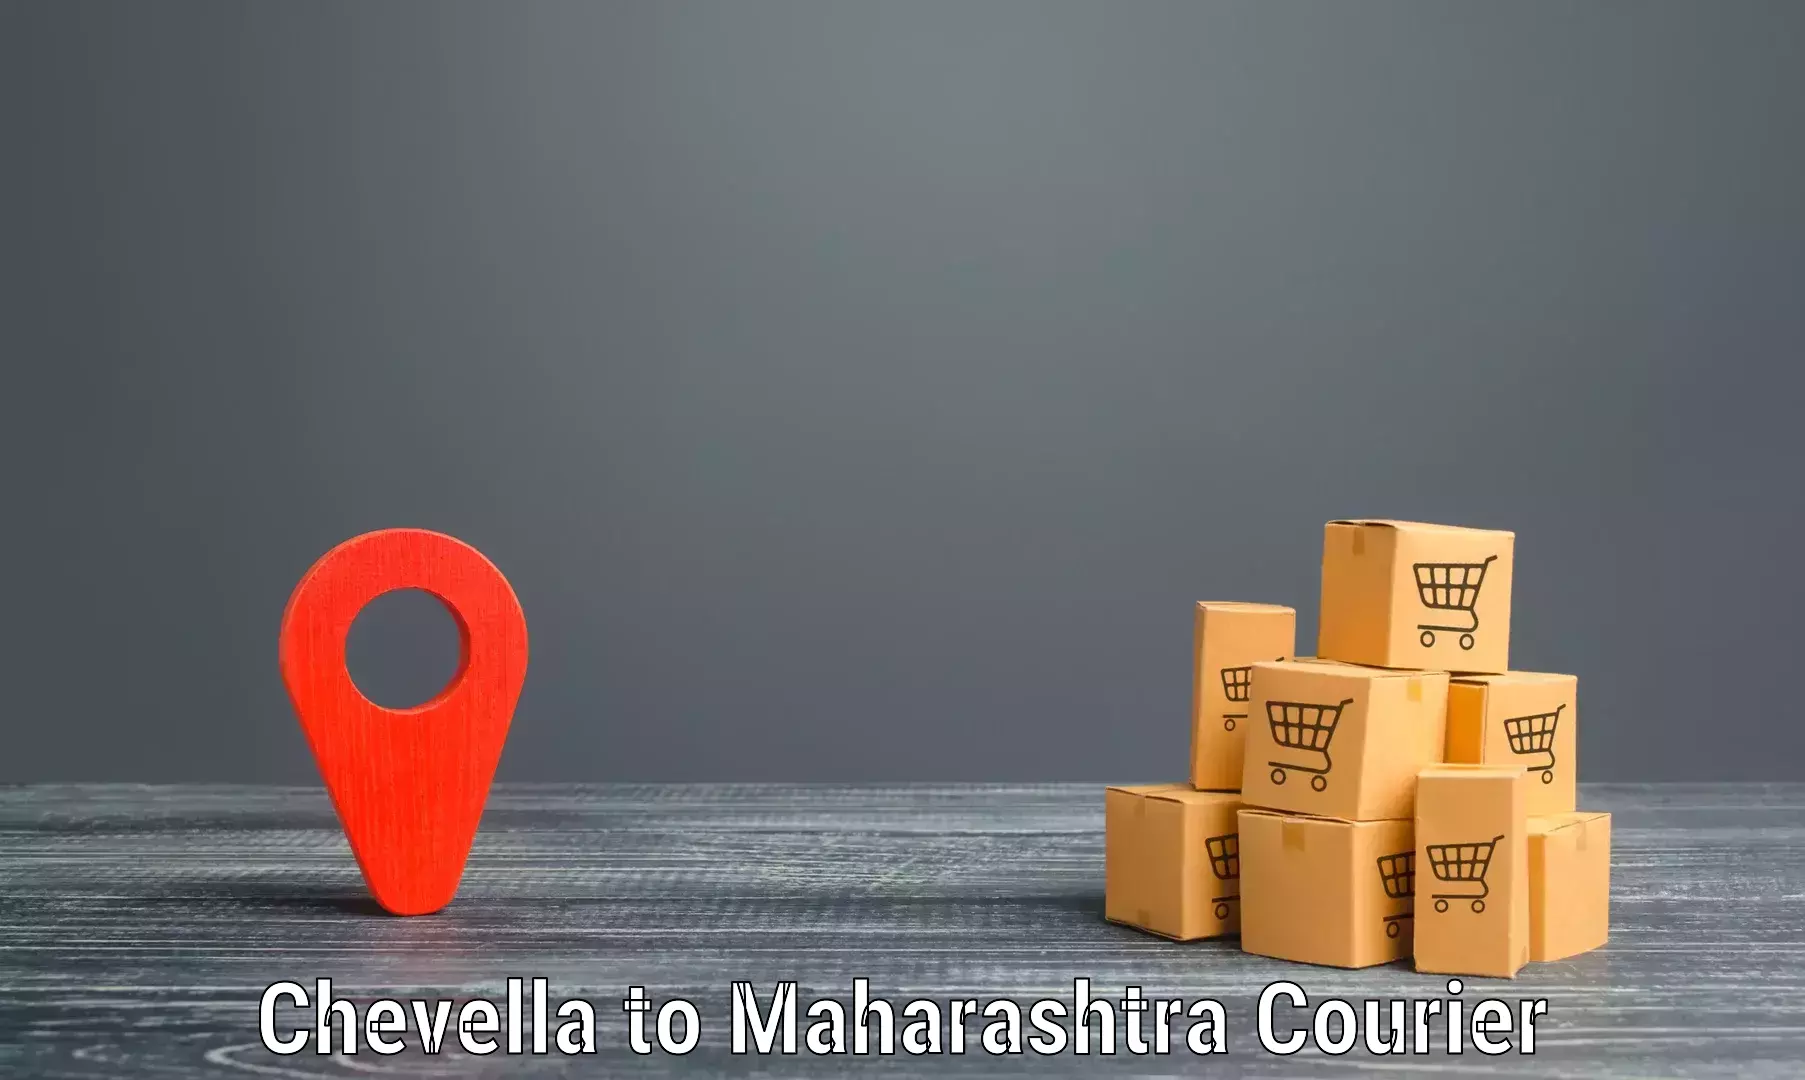 Parcel service for businesses Chevella to Kalyan